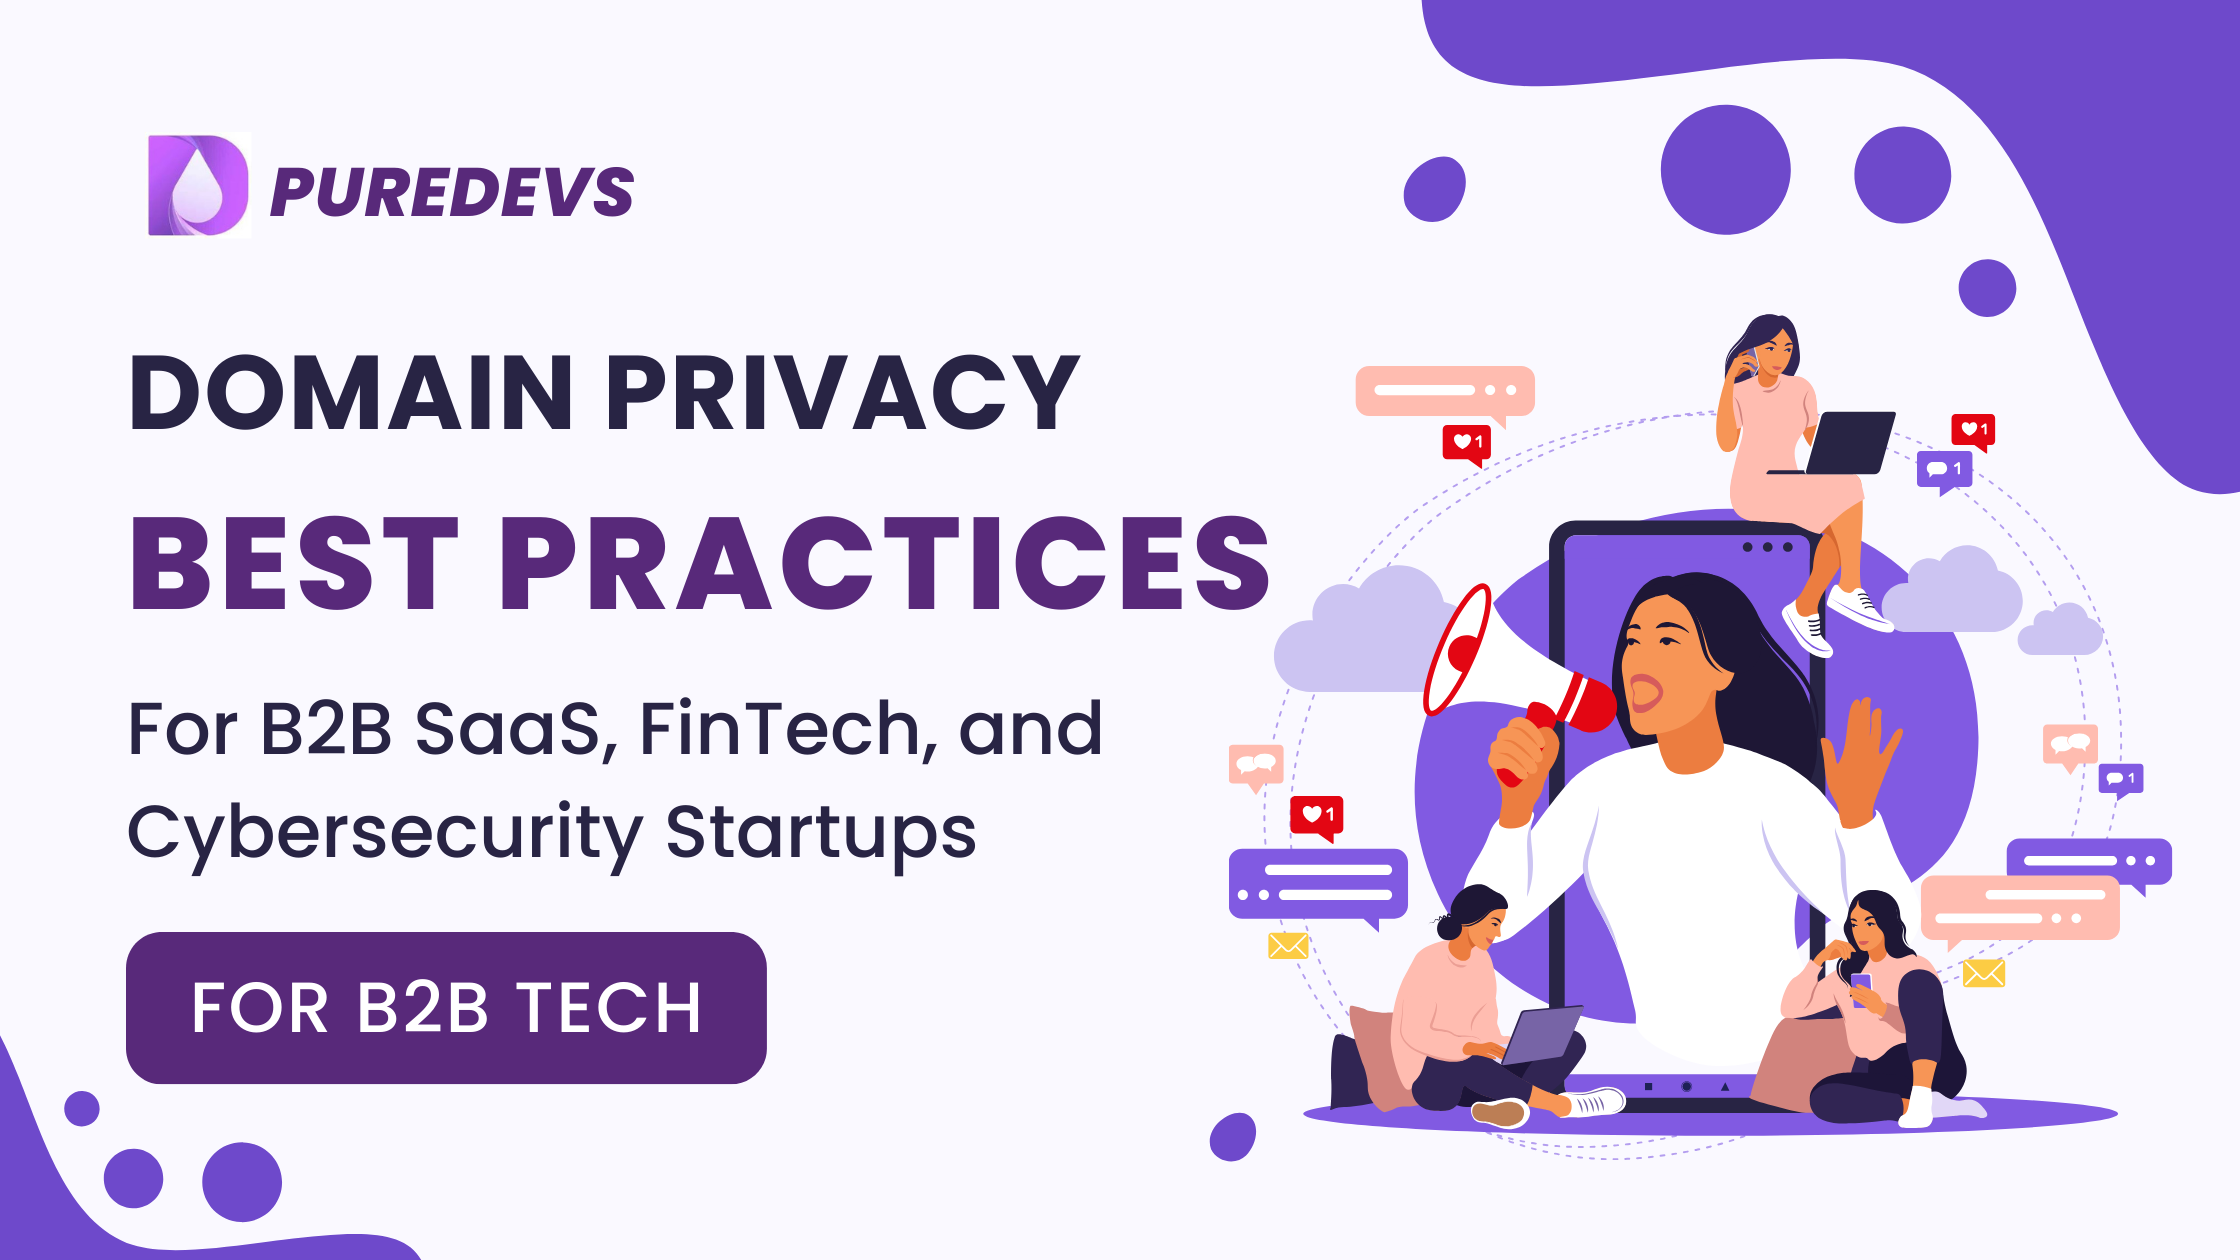 this picture shows domain privacy and protection best practices for B2B tech